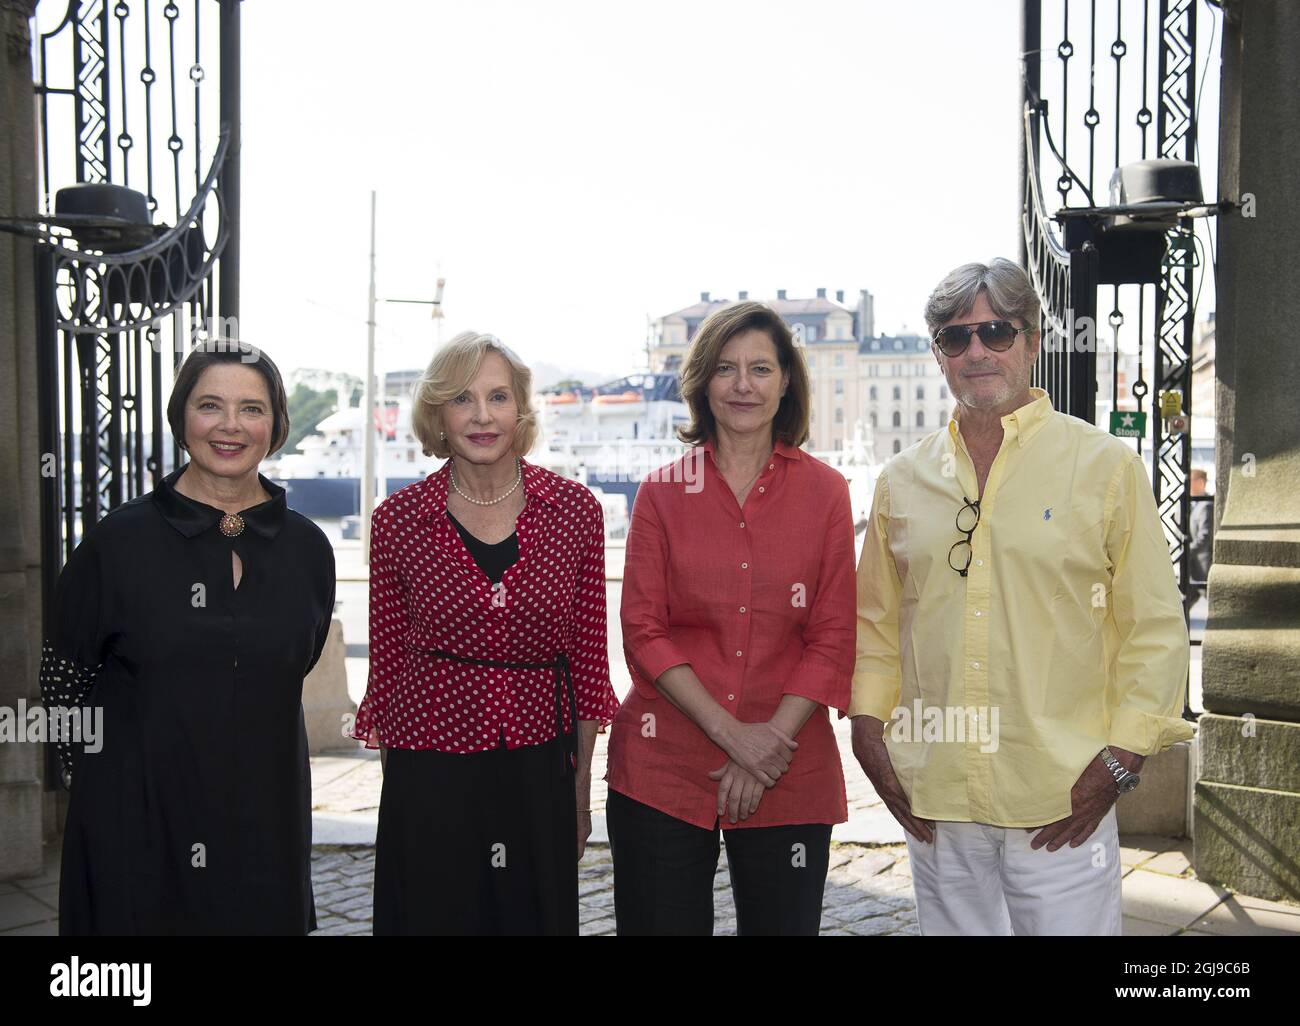 STOCKHOLM 2015-08-24 : Ingrid bergmanÂ´s four children Isabella Rossellini, Pia Lindstrom,, Ingrid and Roberto Rossellini are seen during a press conference in Stockholm, Sweden, August 24, 2015. The siblings are visiting Stockholm for the premiere of the movieÂ”I am Ingrid' on the occasion of the 100 anniversary of the birth of the late Swedish actress Ingrid Bergman. Foto: Maja Suslin / TT / Kod 10300  Stock Photo